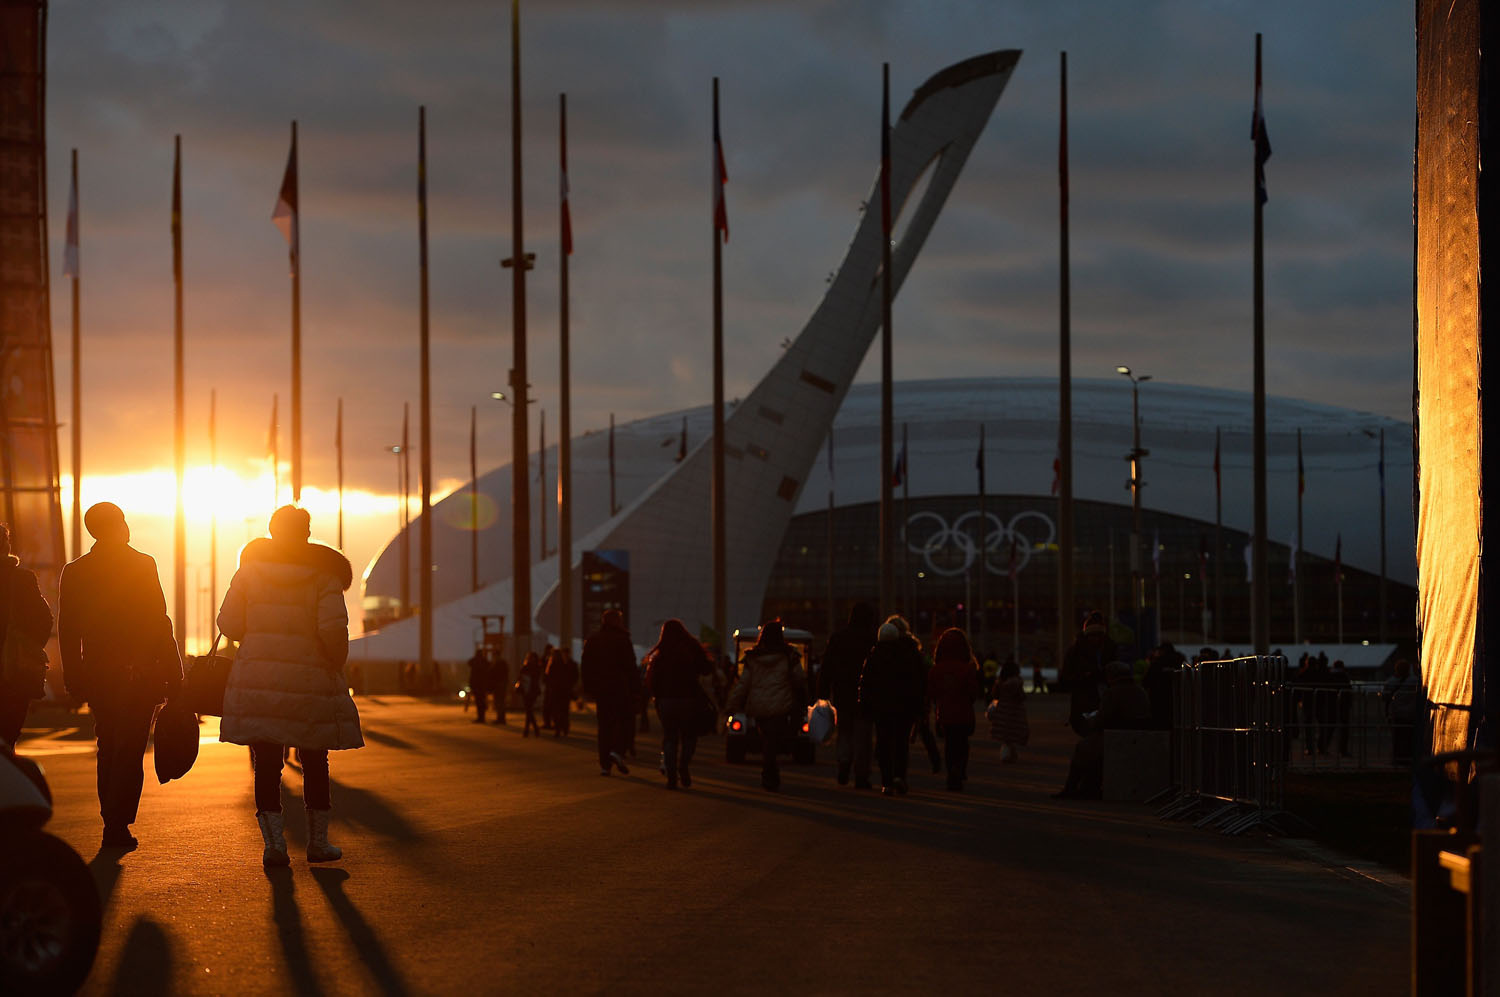 Visitors walk inside the Olympic Park prior to the Sochi 2014 Winter Olympics on February 6, 2014. (Pascal Le Segretain&mdash;Getty Images)